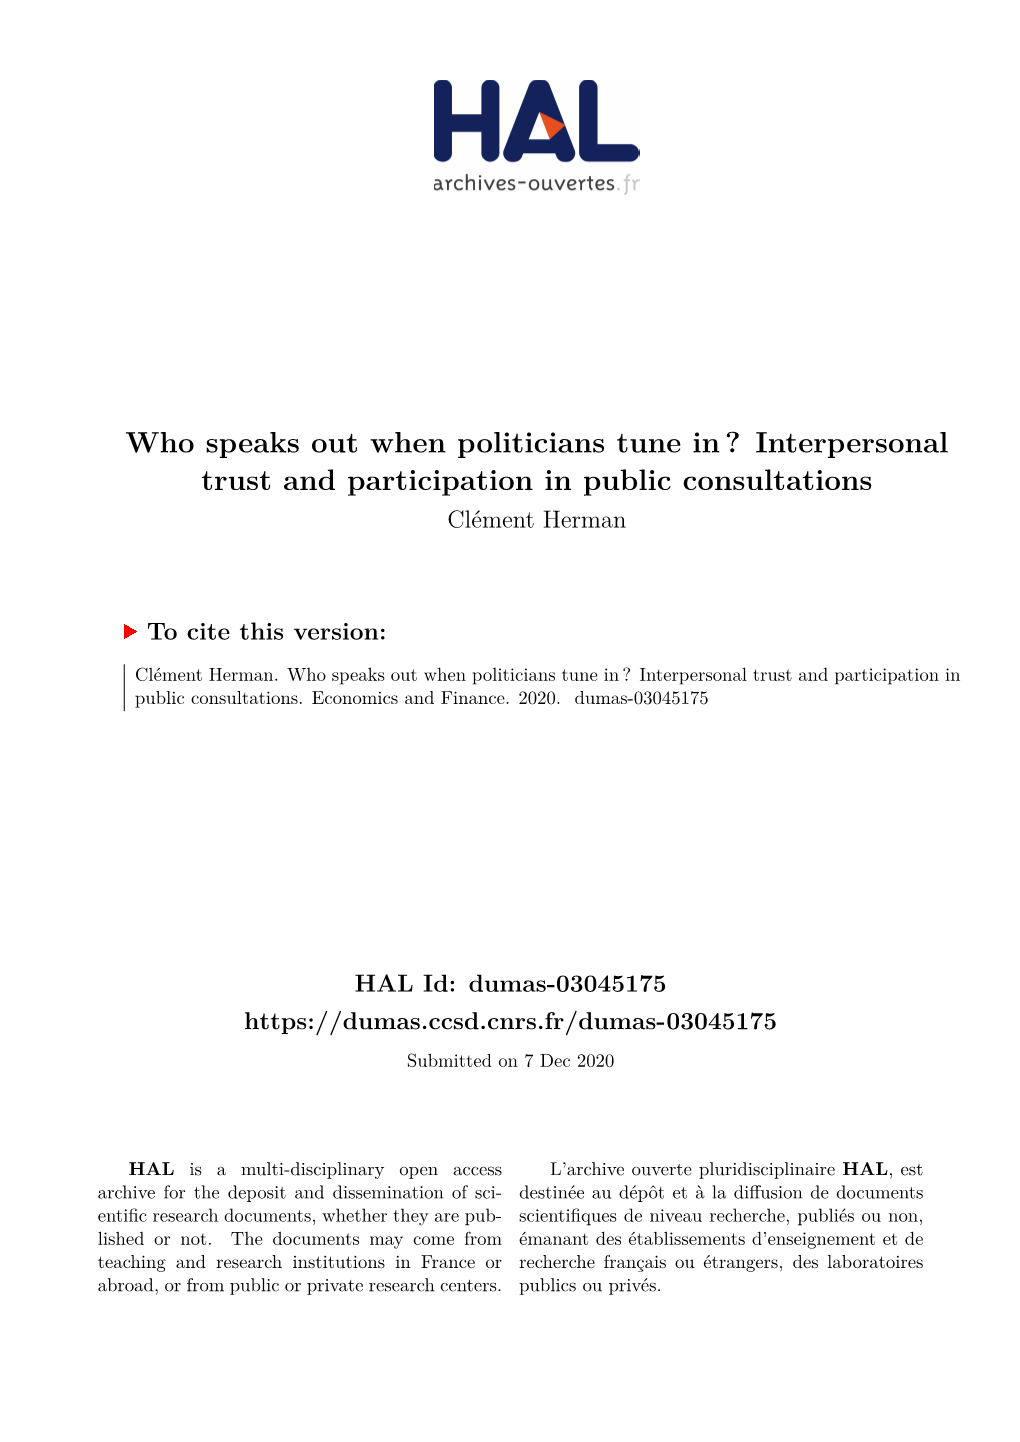 Interpersonal Trust and Participation in Public Consultations Clément Herman